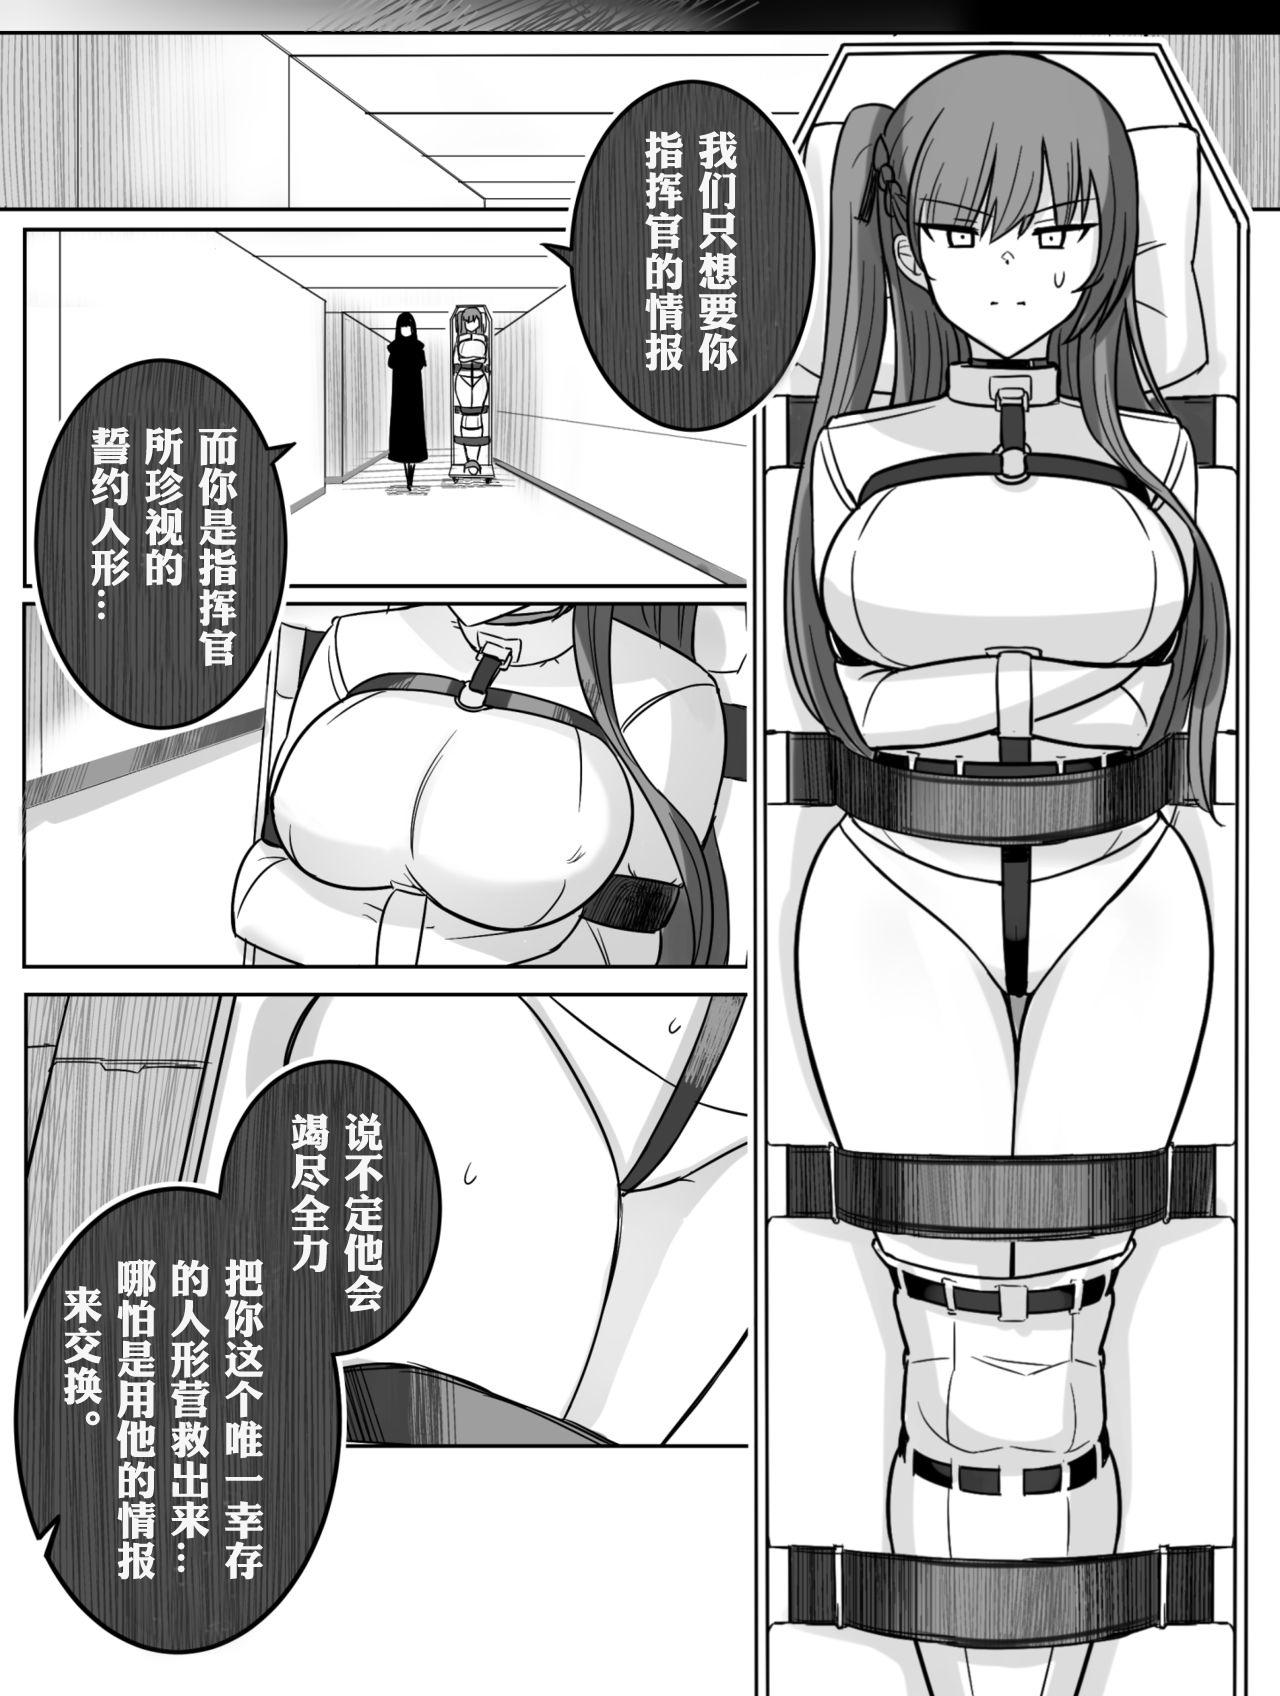 Maledom Lost Dolls - Girls frontline Lovers - Page 5